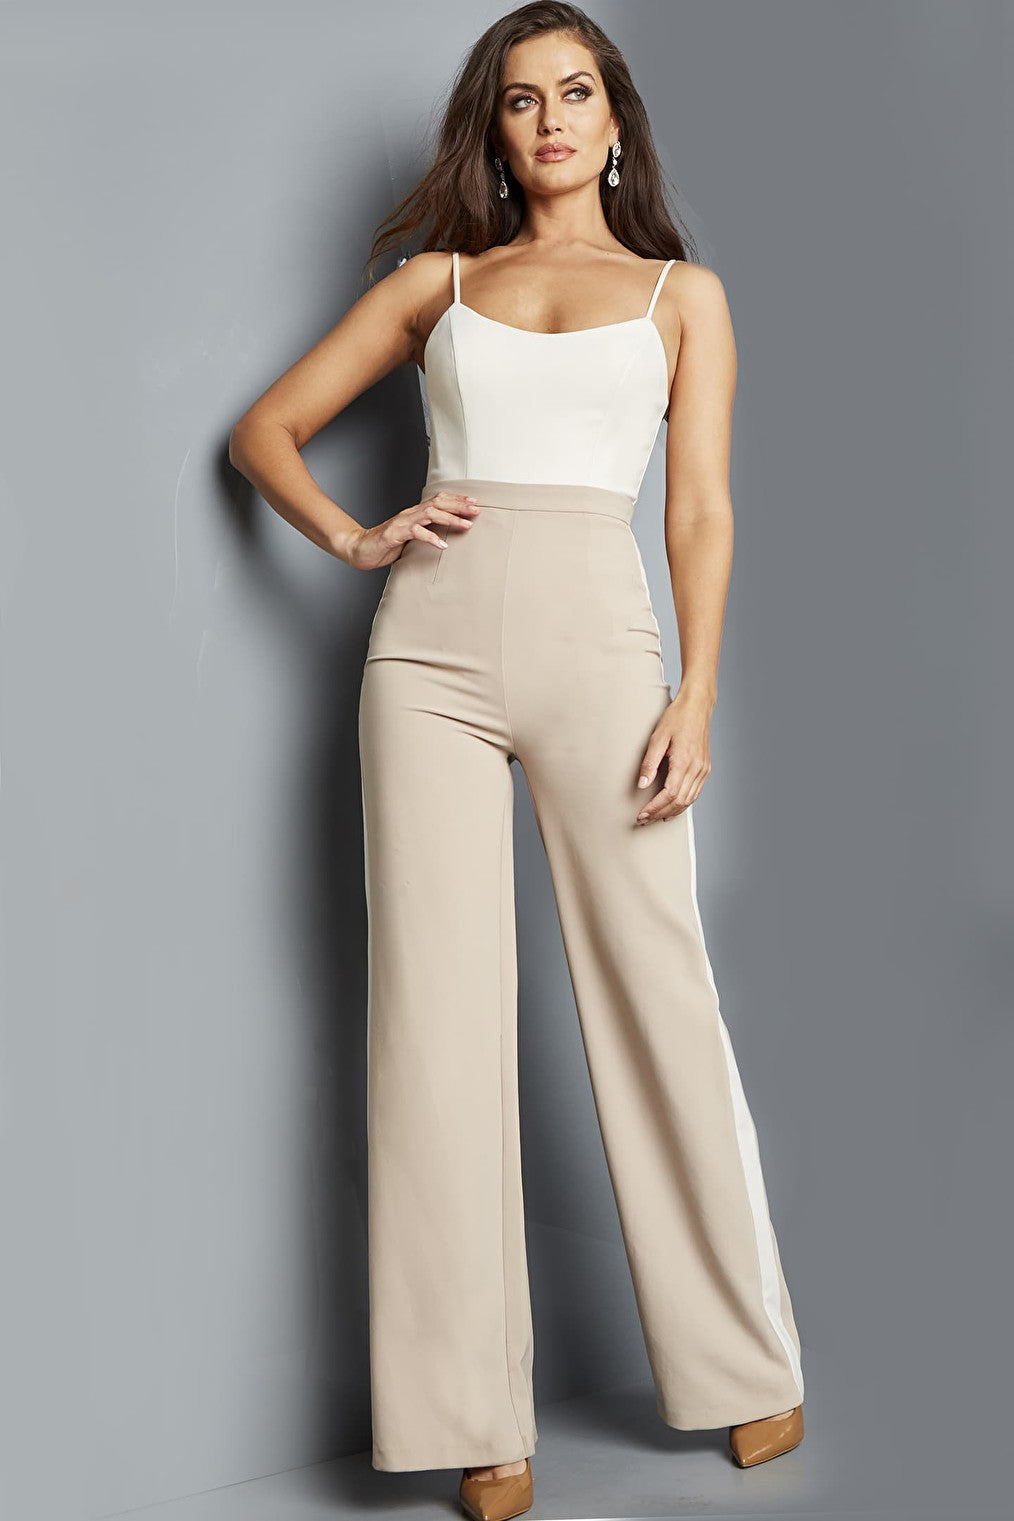 ivory nude pant suit 07110